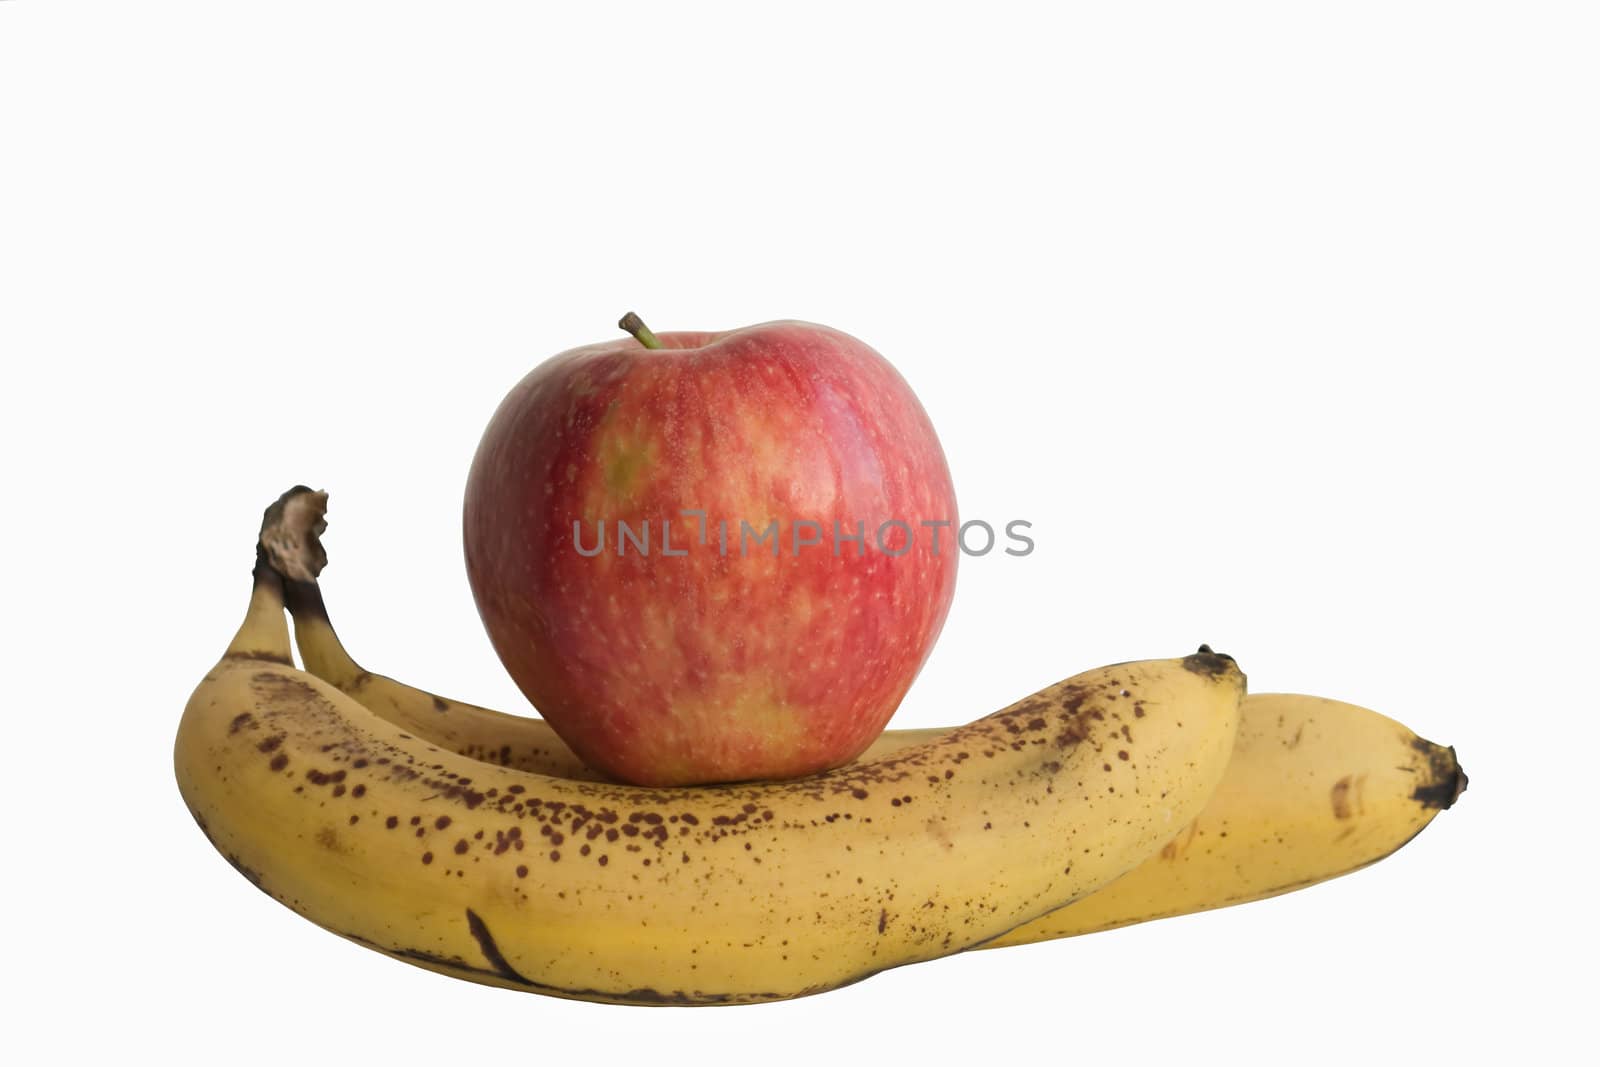 Fruits-apples and two bananas isolated on a white background.